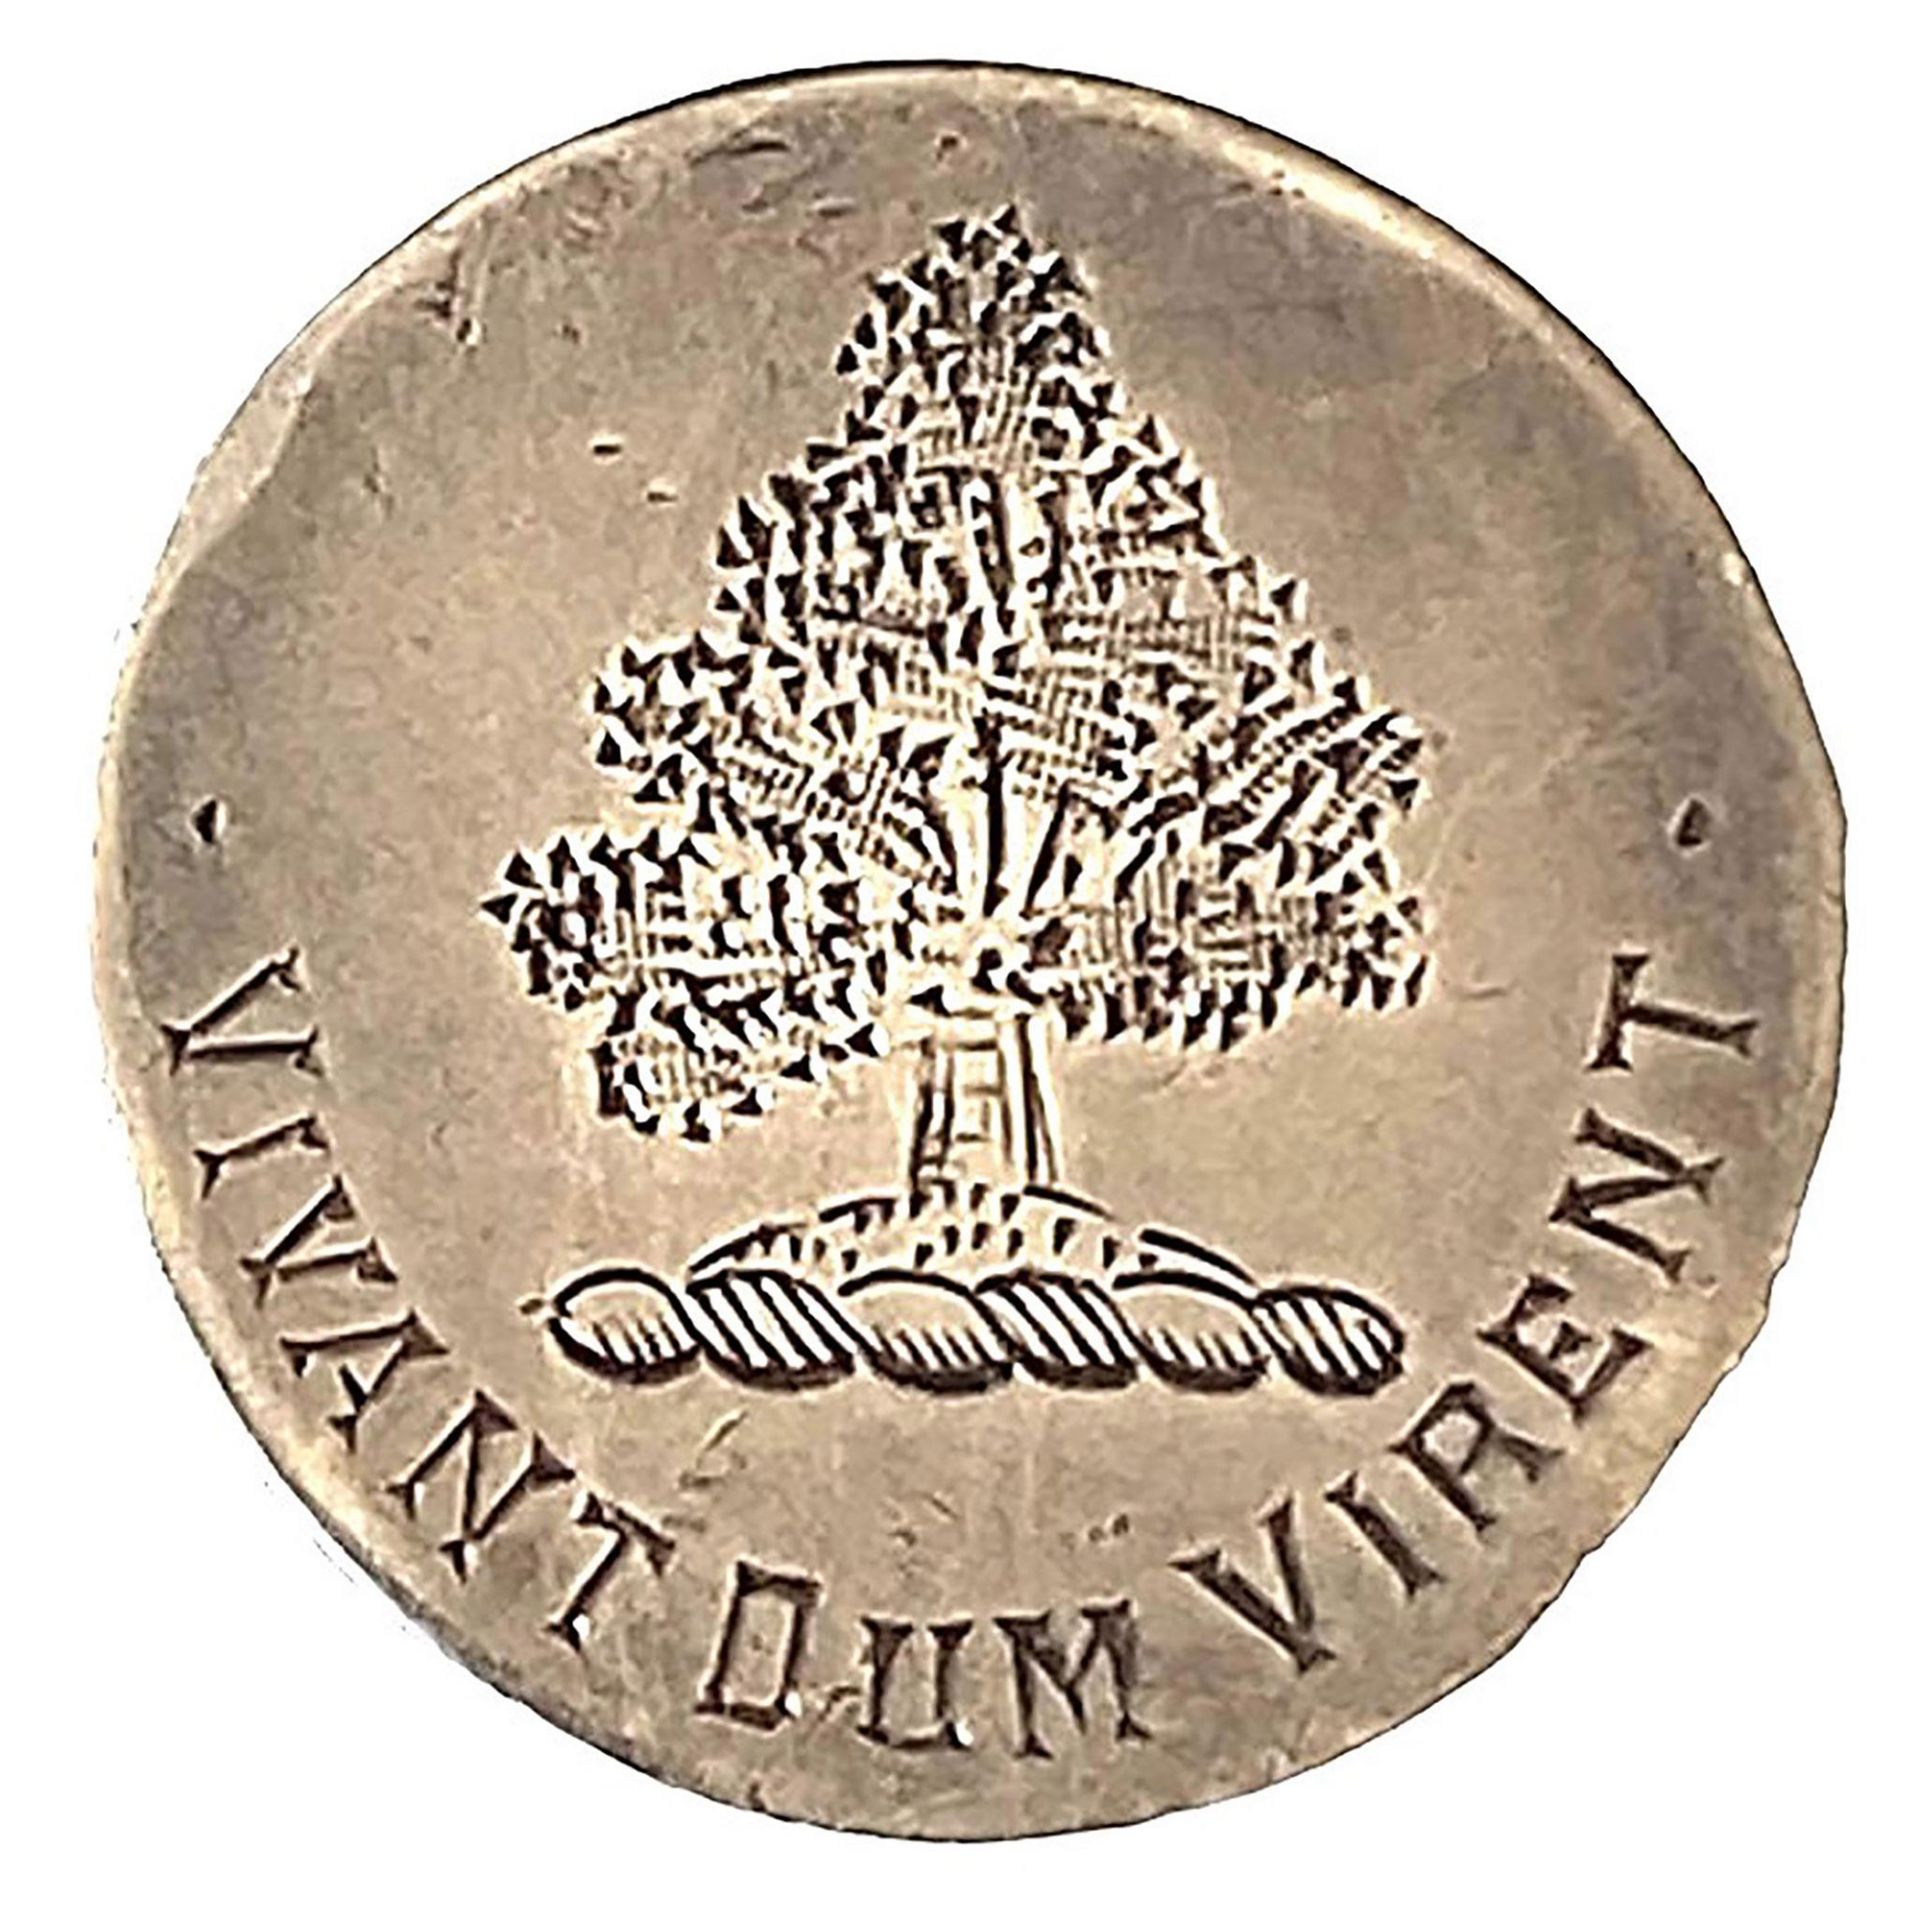 A scarce division one livery crest button